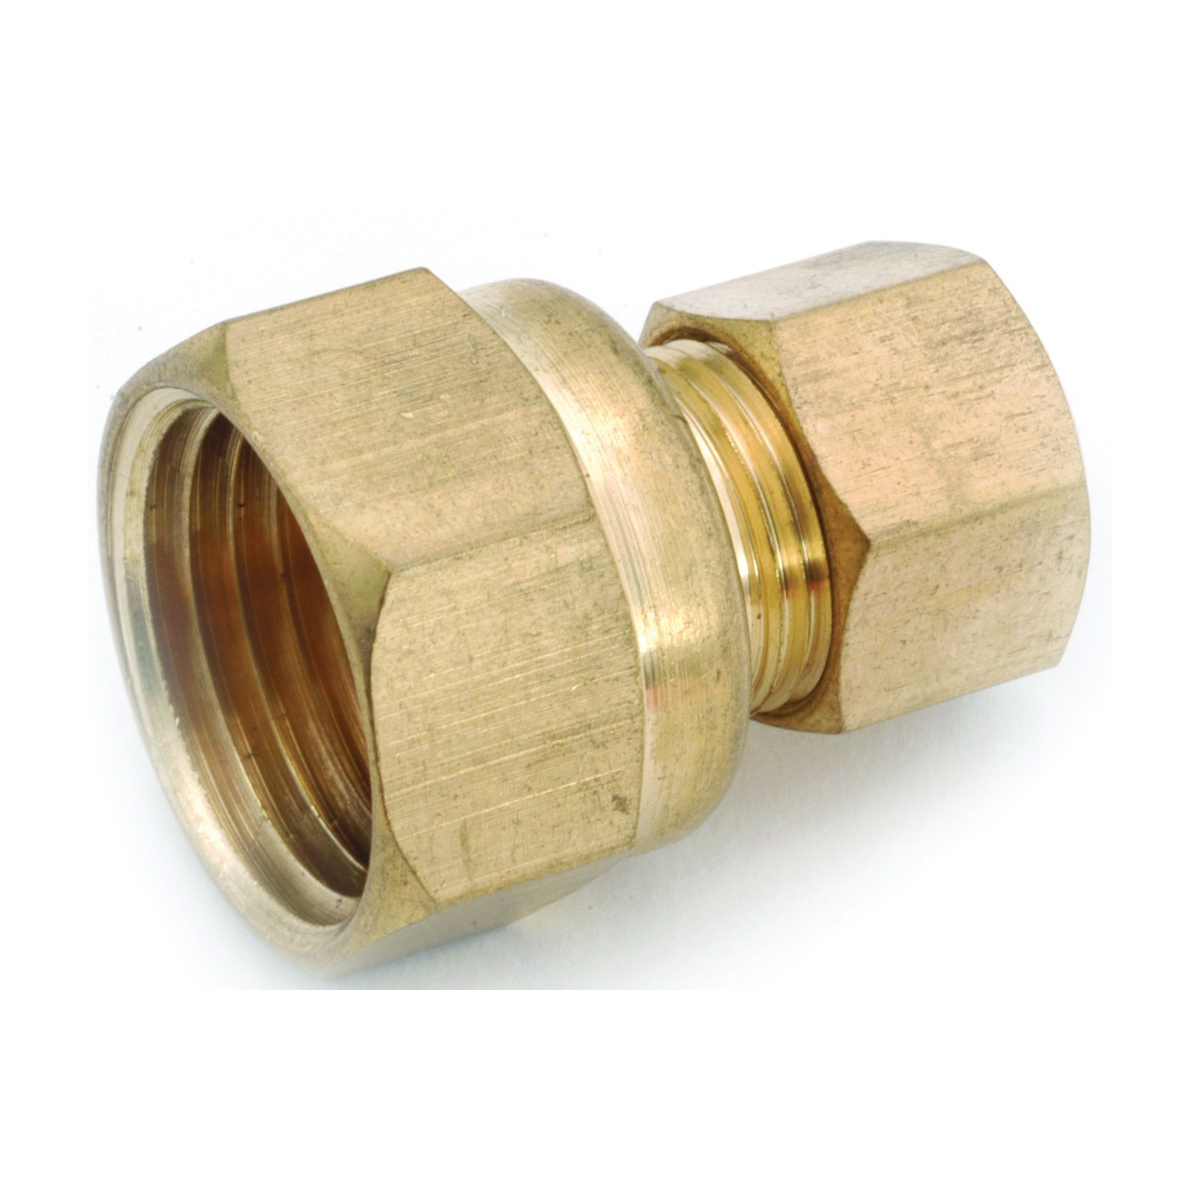 750097-0604 Tube Adapter, 1/4 x 3/8 in, Compression, Brass